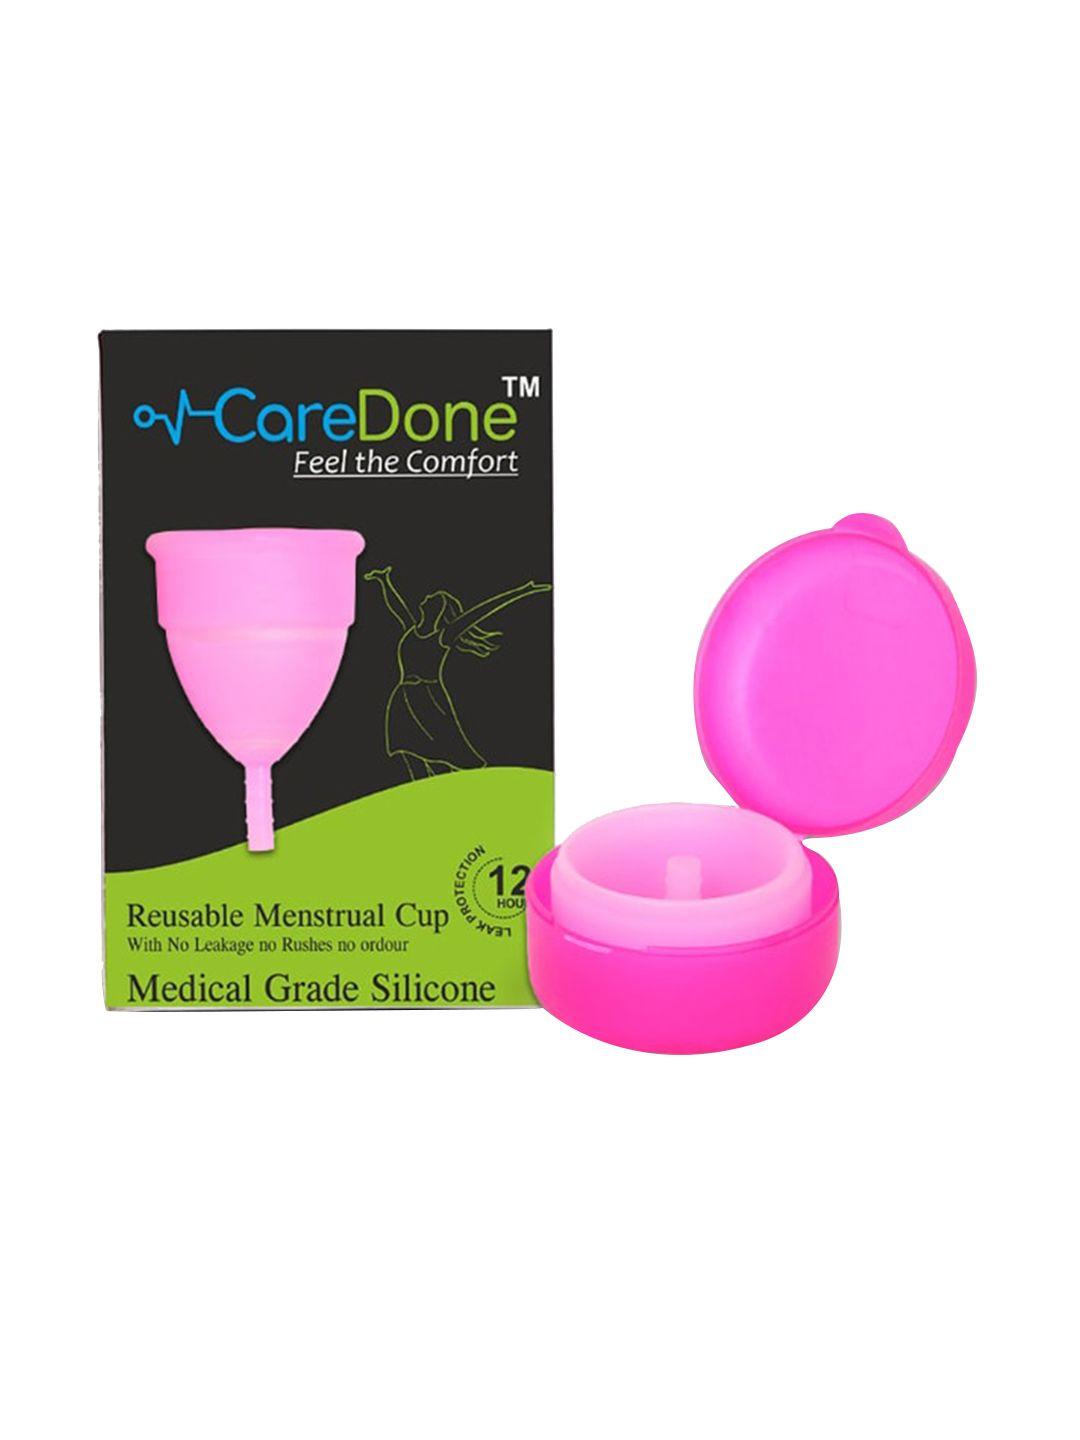 caredone medium reusable menstrual cup with menstrual cup wash - pink